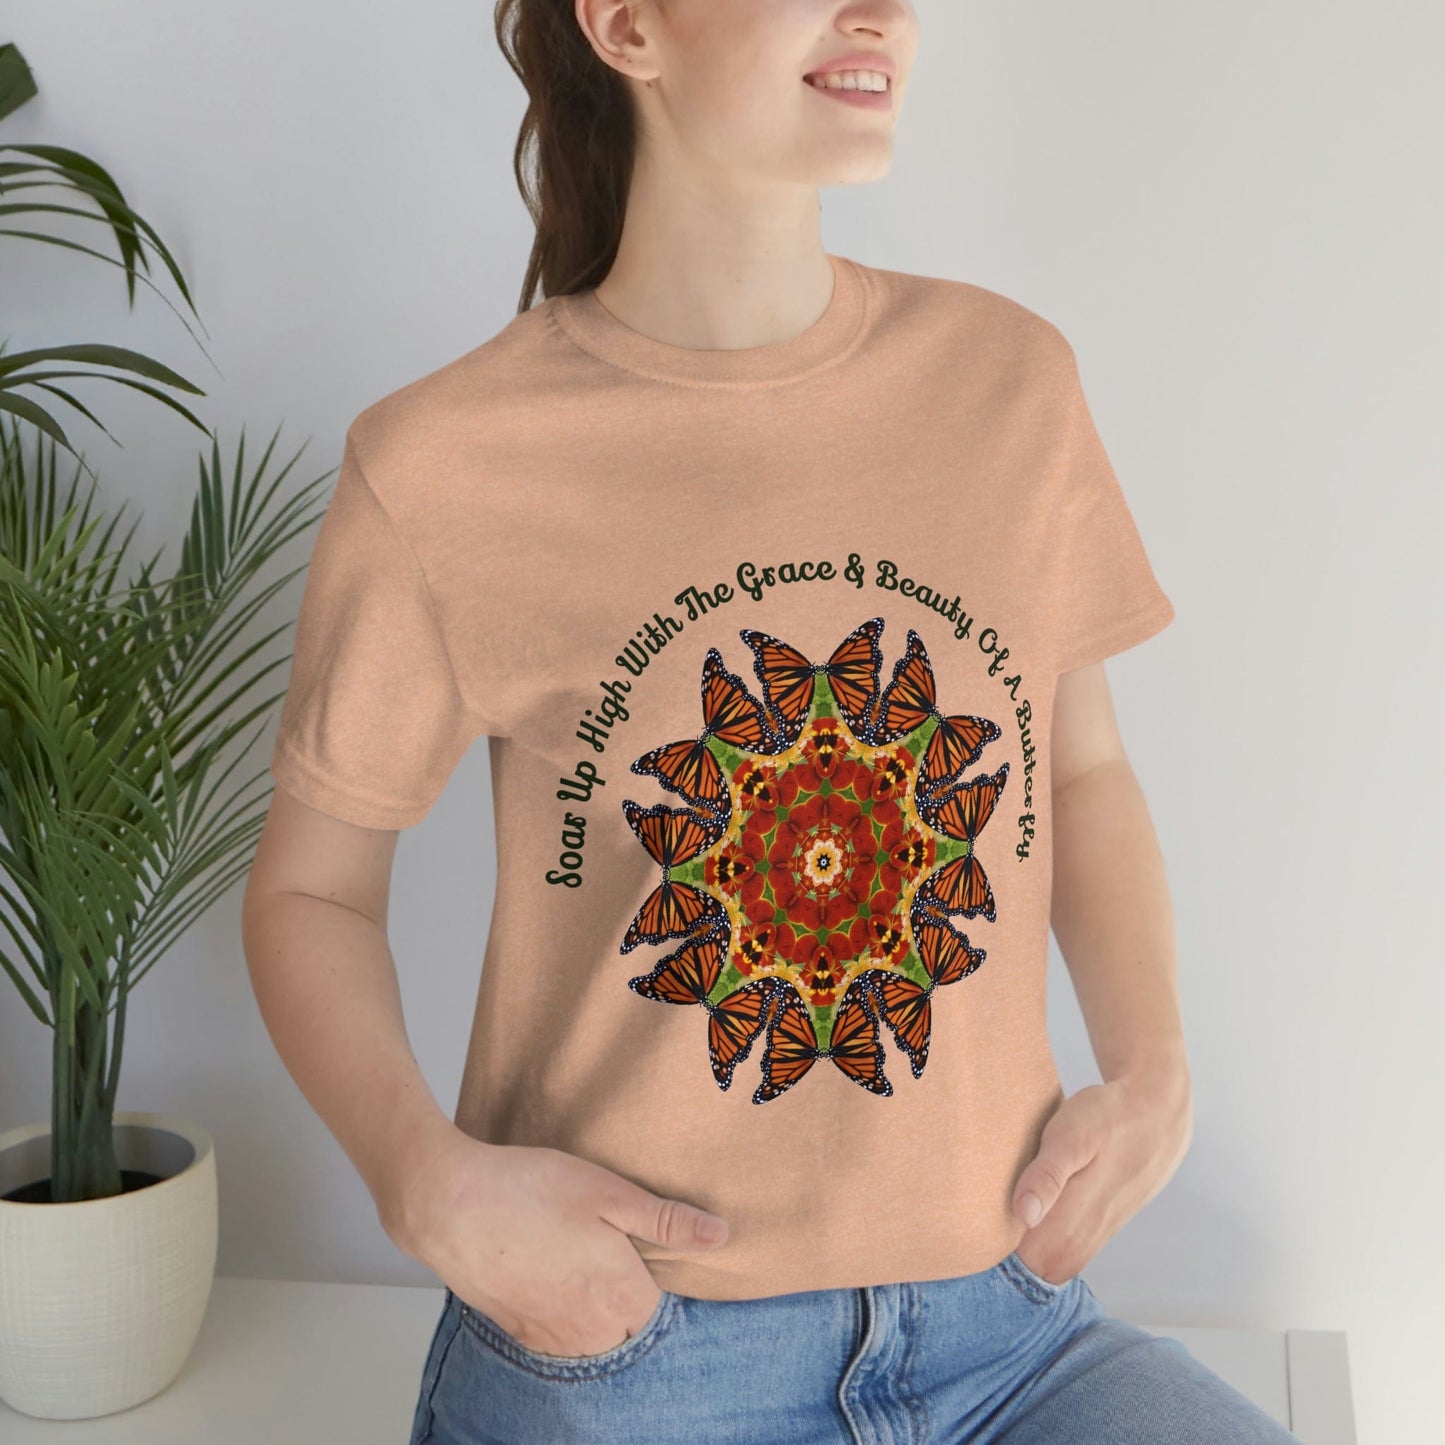 Butterfly Top, Zen Mystical Poet Shirt, Cottage Core Bug, Shirt, Best Selling Shirts, Insect Shirt, Cute Shirts Teens & Women Yoga Clothes